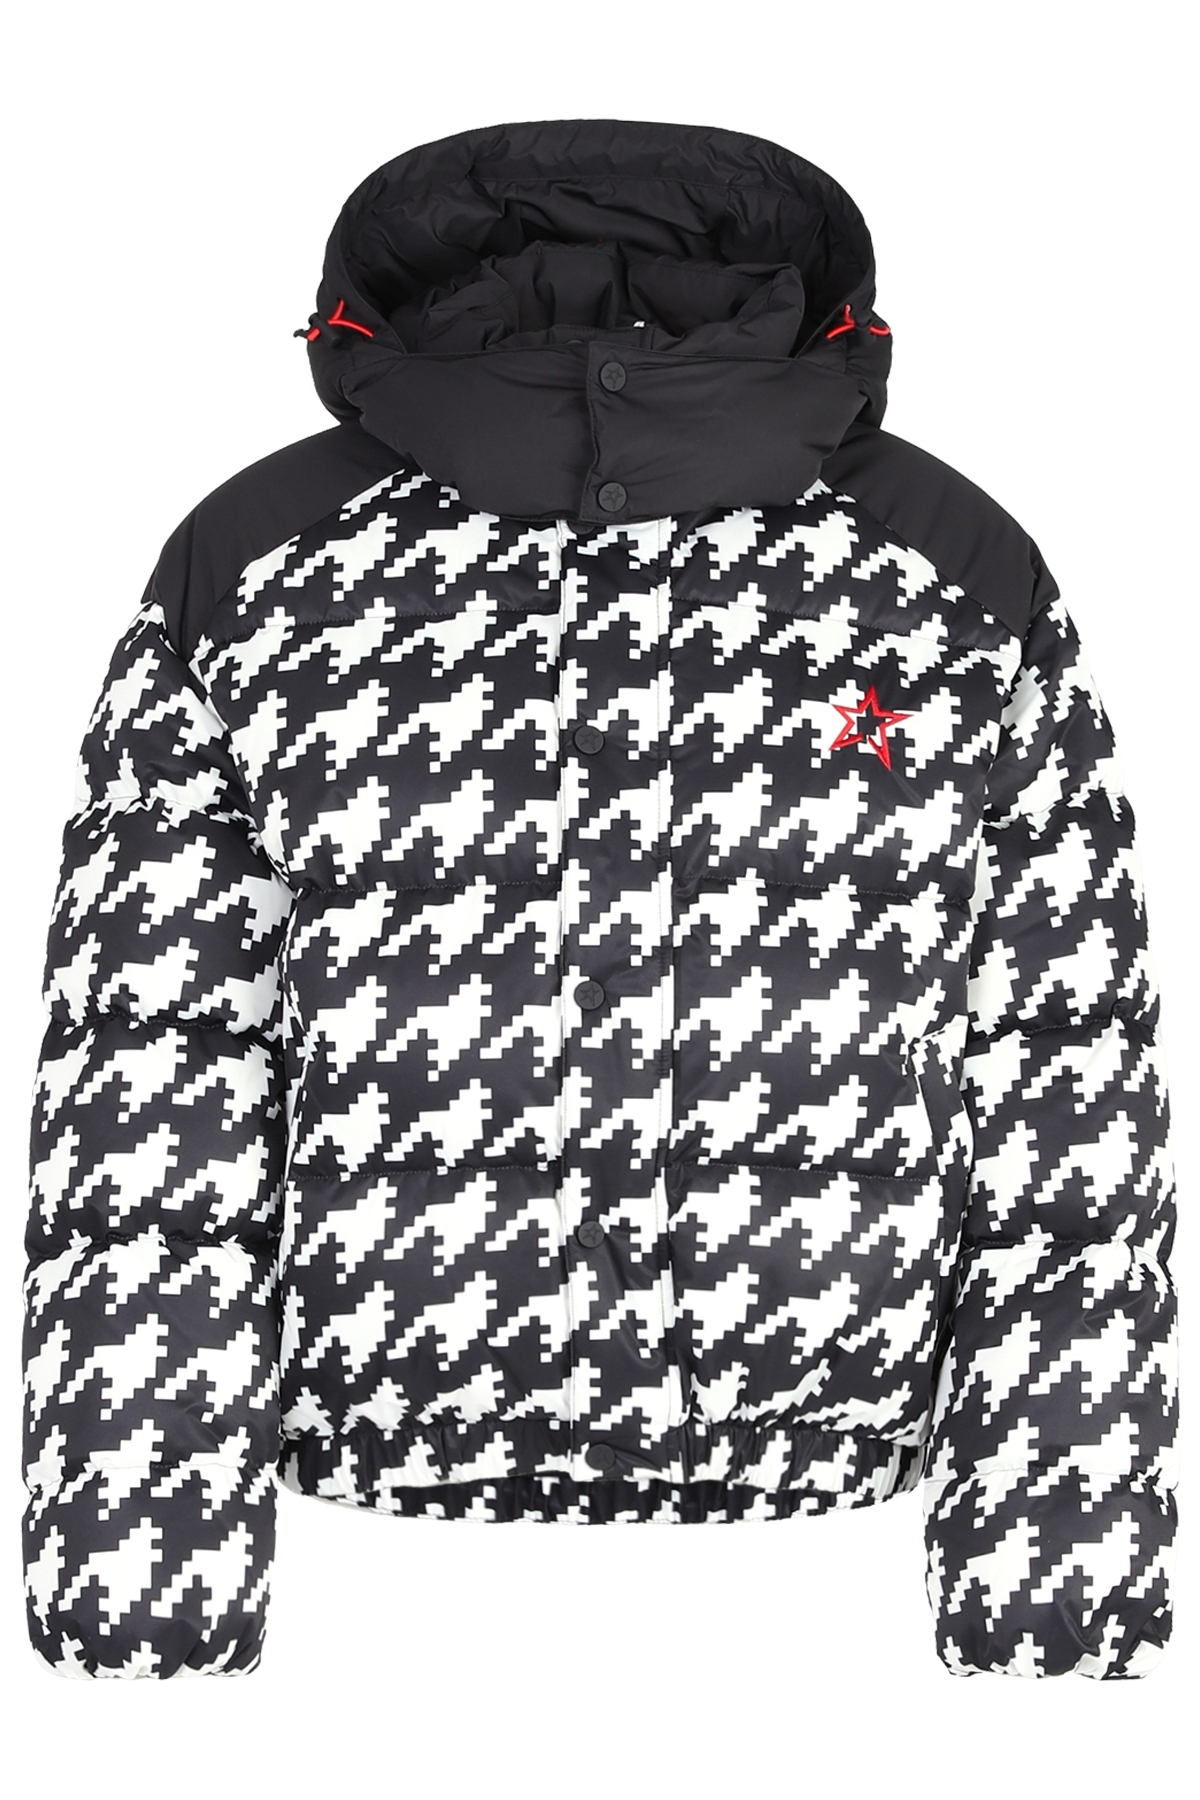 Moment Puffer Houndstooth Print Jacket